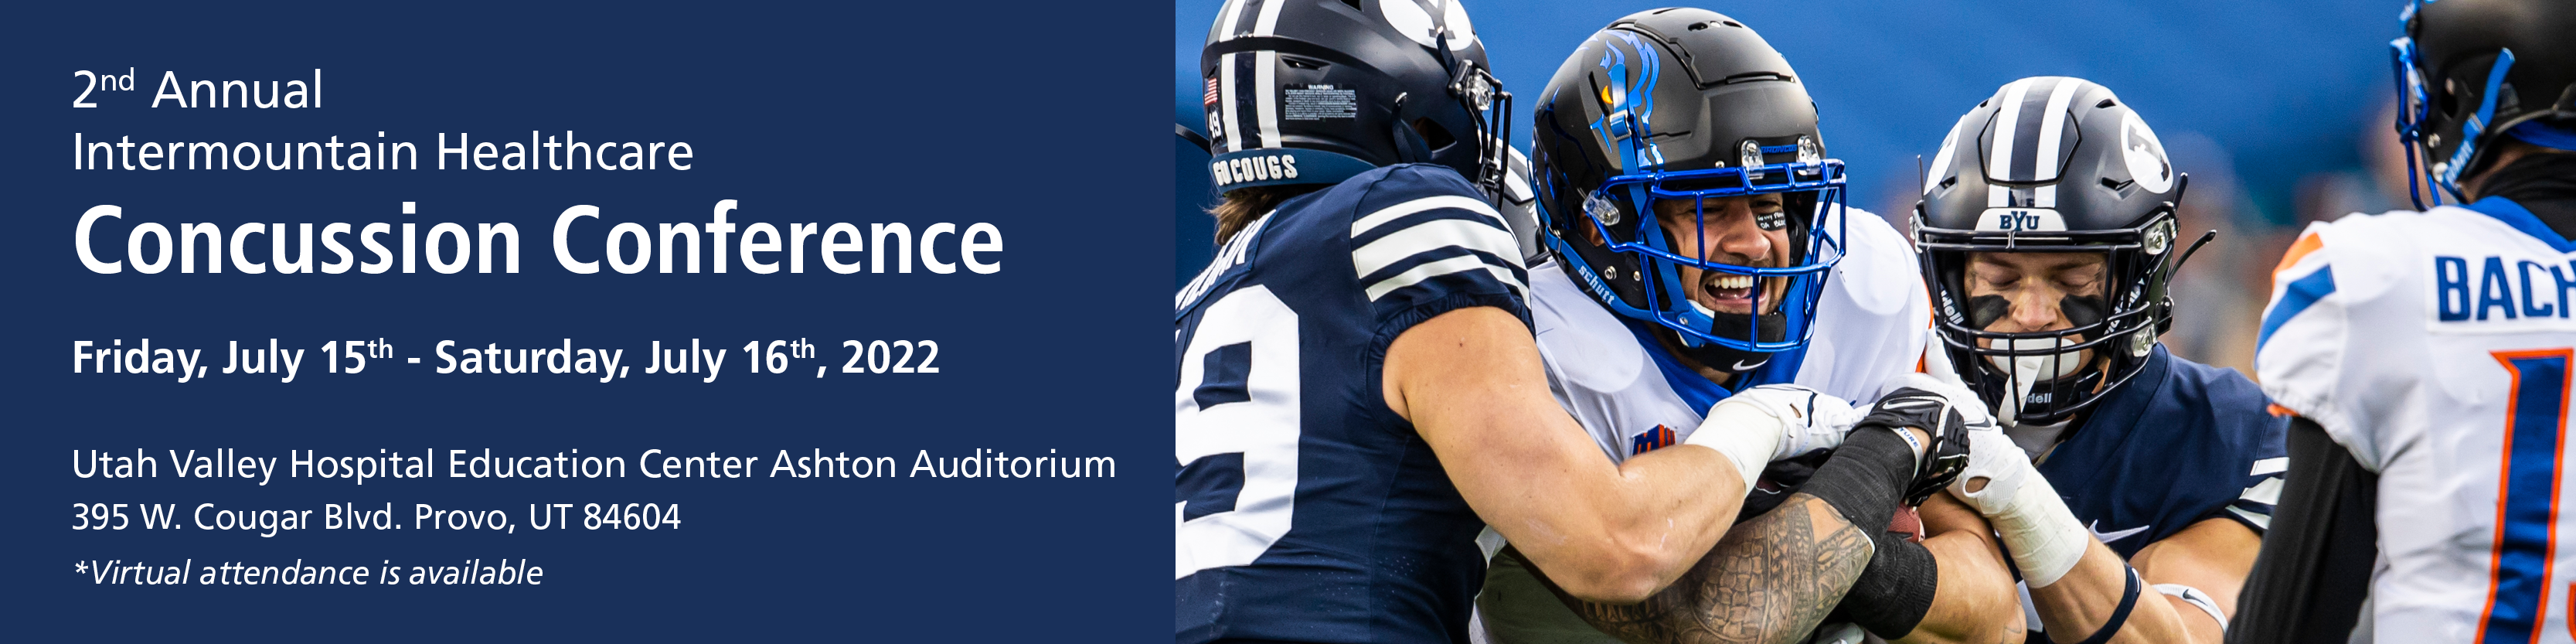 2nd Annual Intermountain Healthcare Concussion Conference Banner